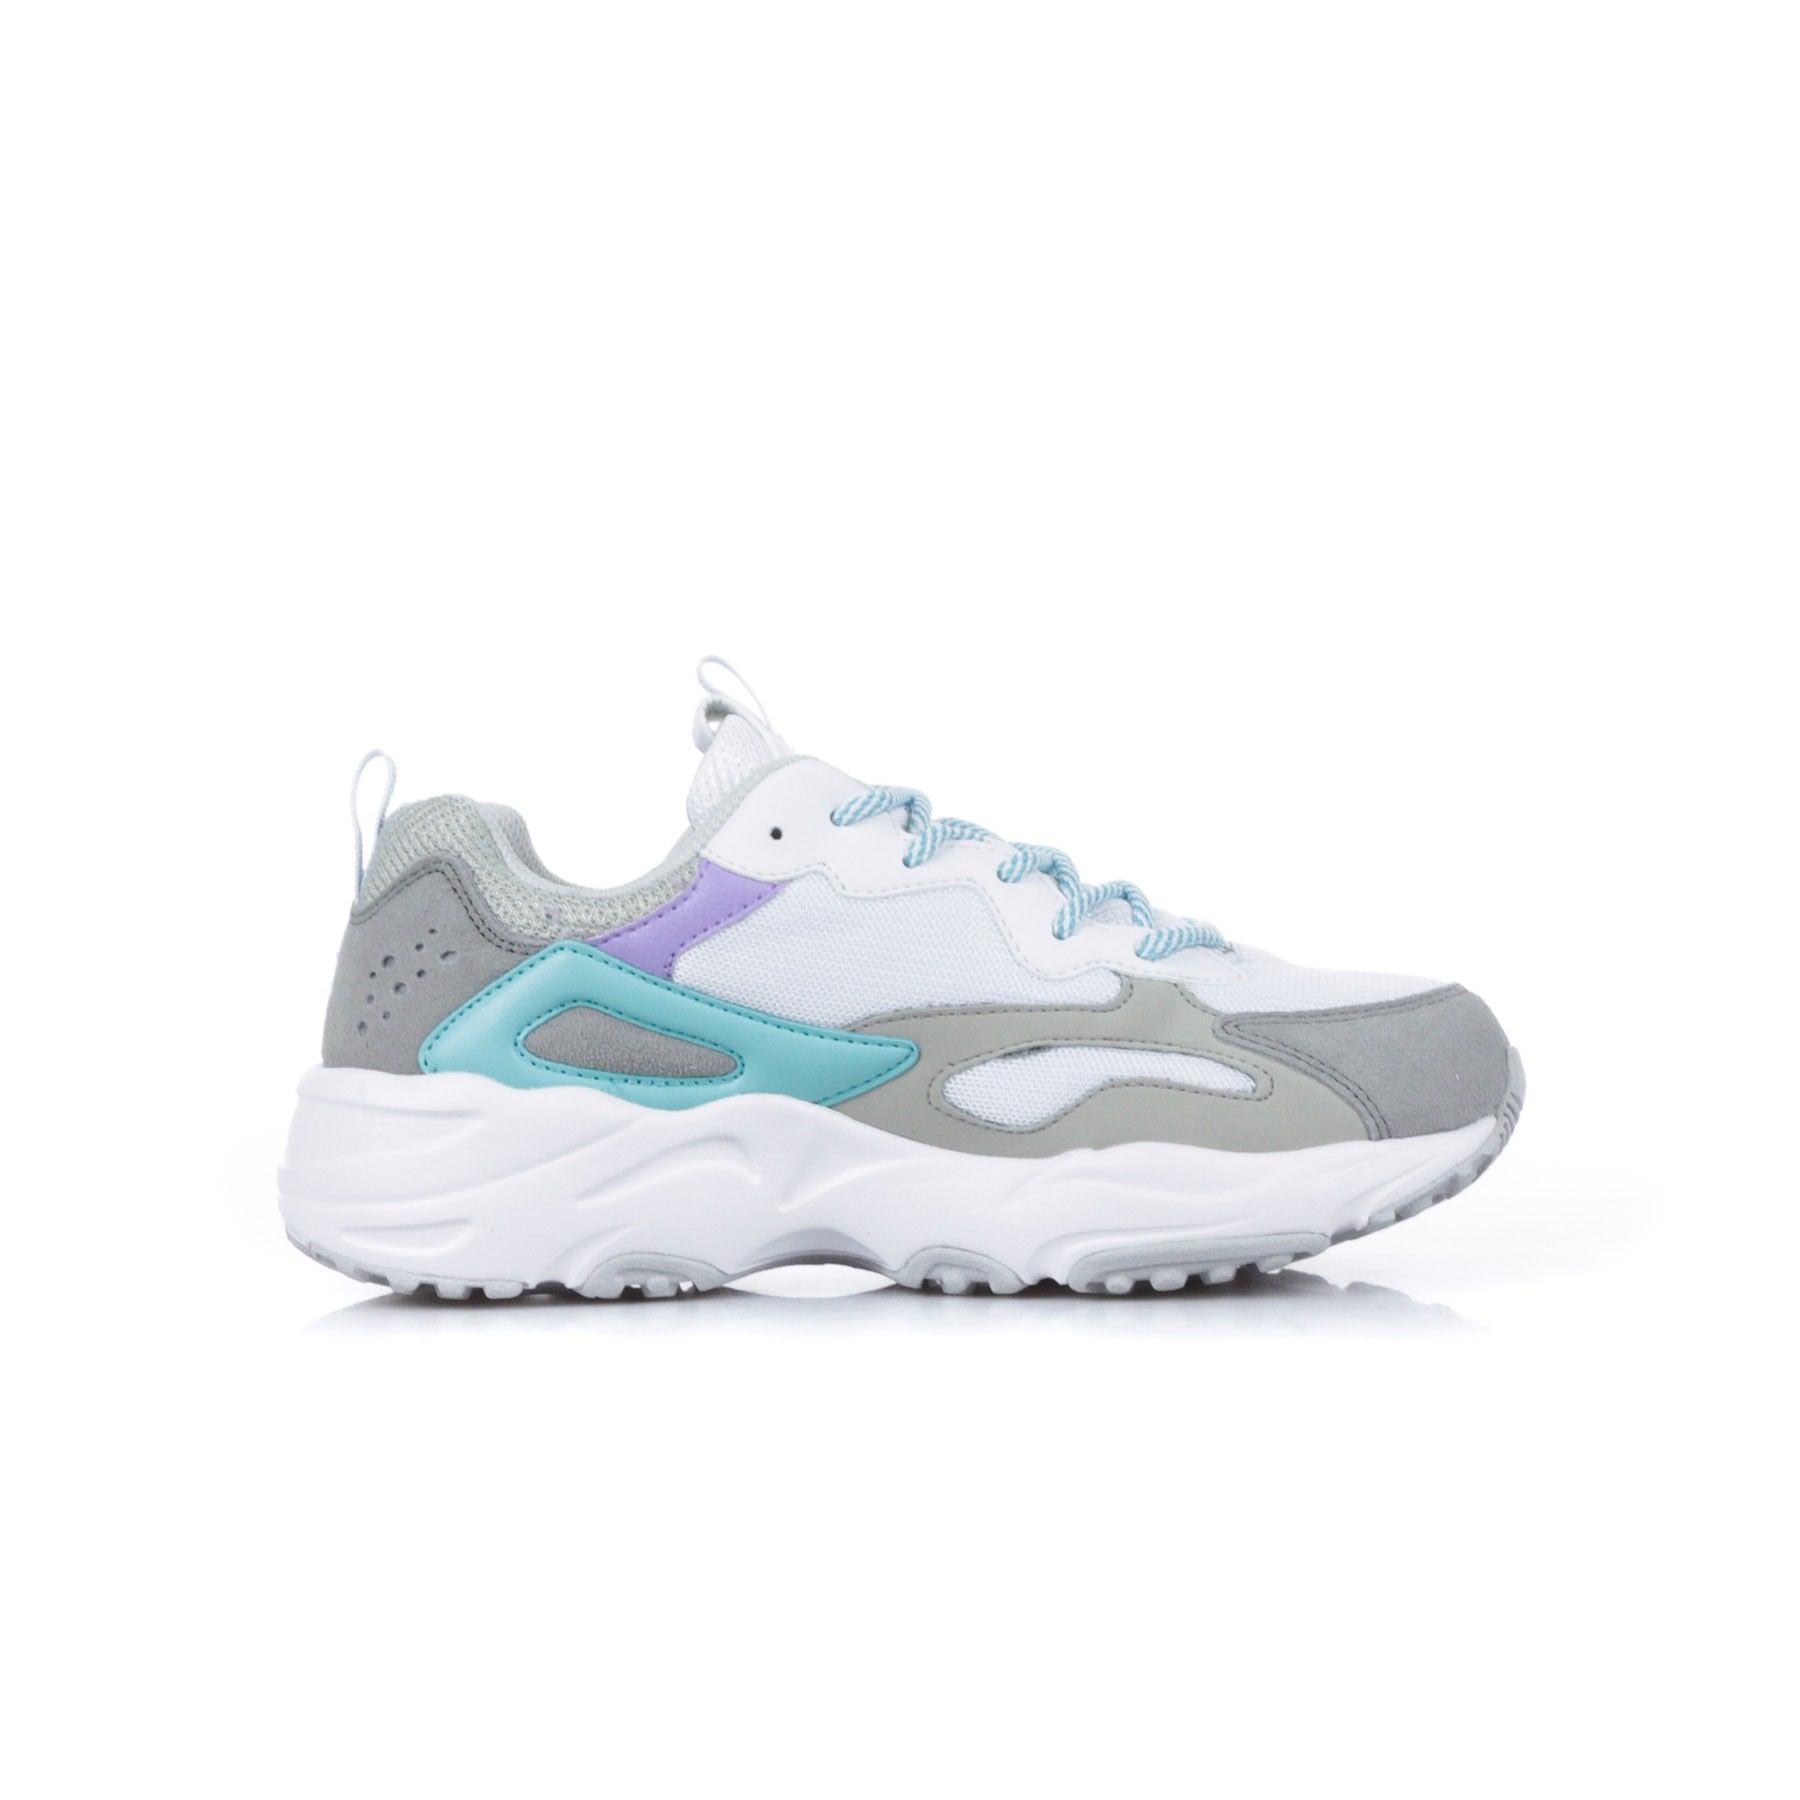 Scarpa Bassa Donna Ray Tracer Wmn White/violet Tulip/blue Curacao